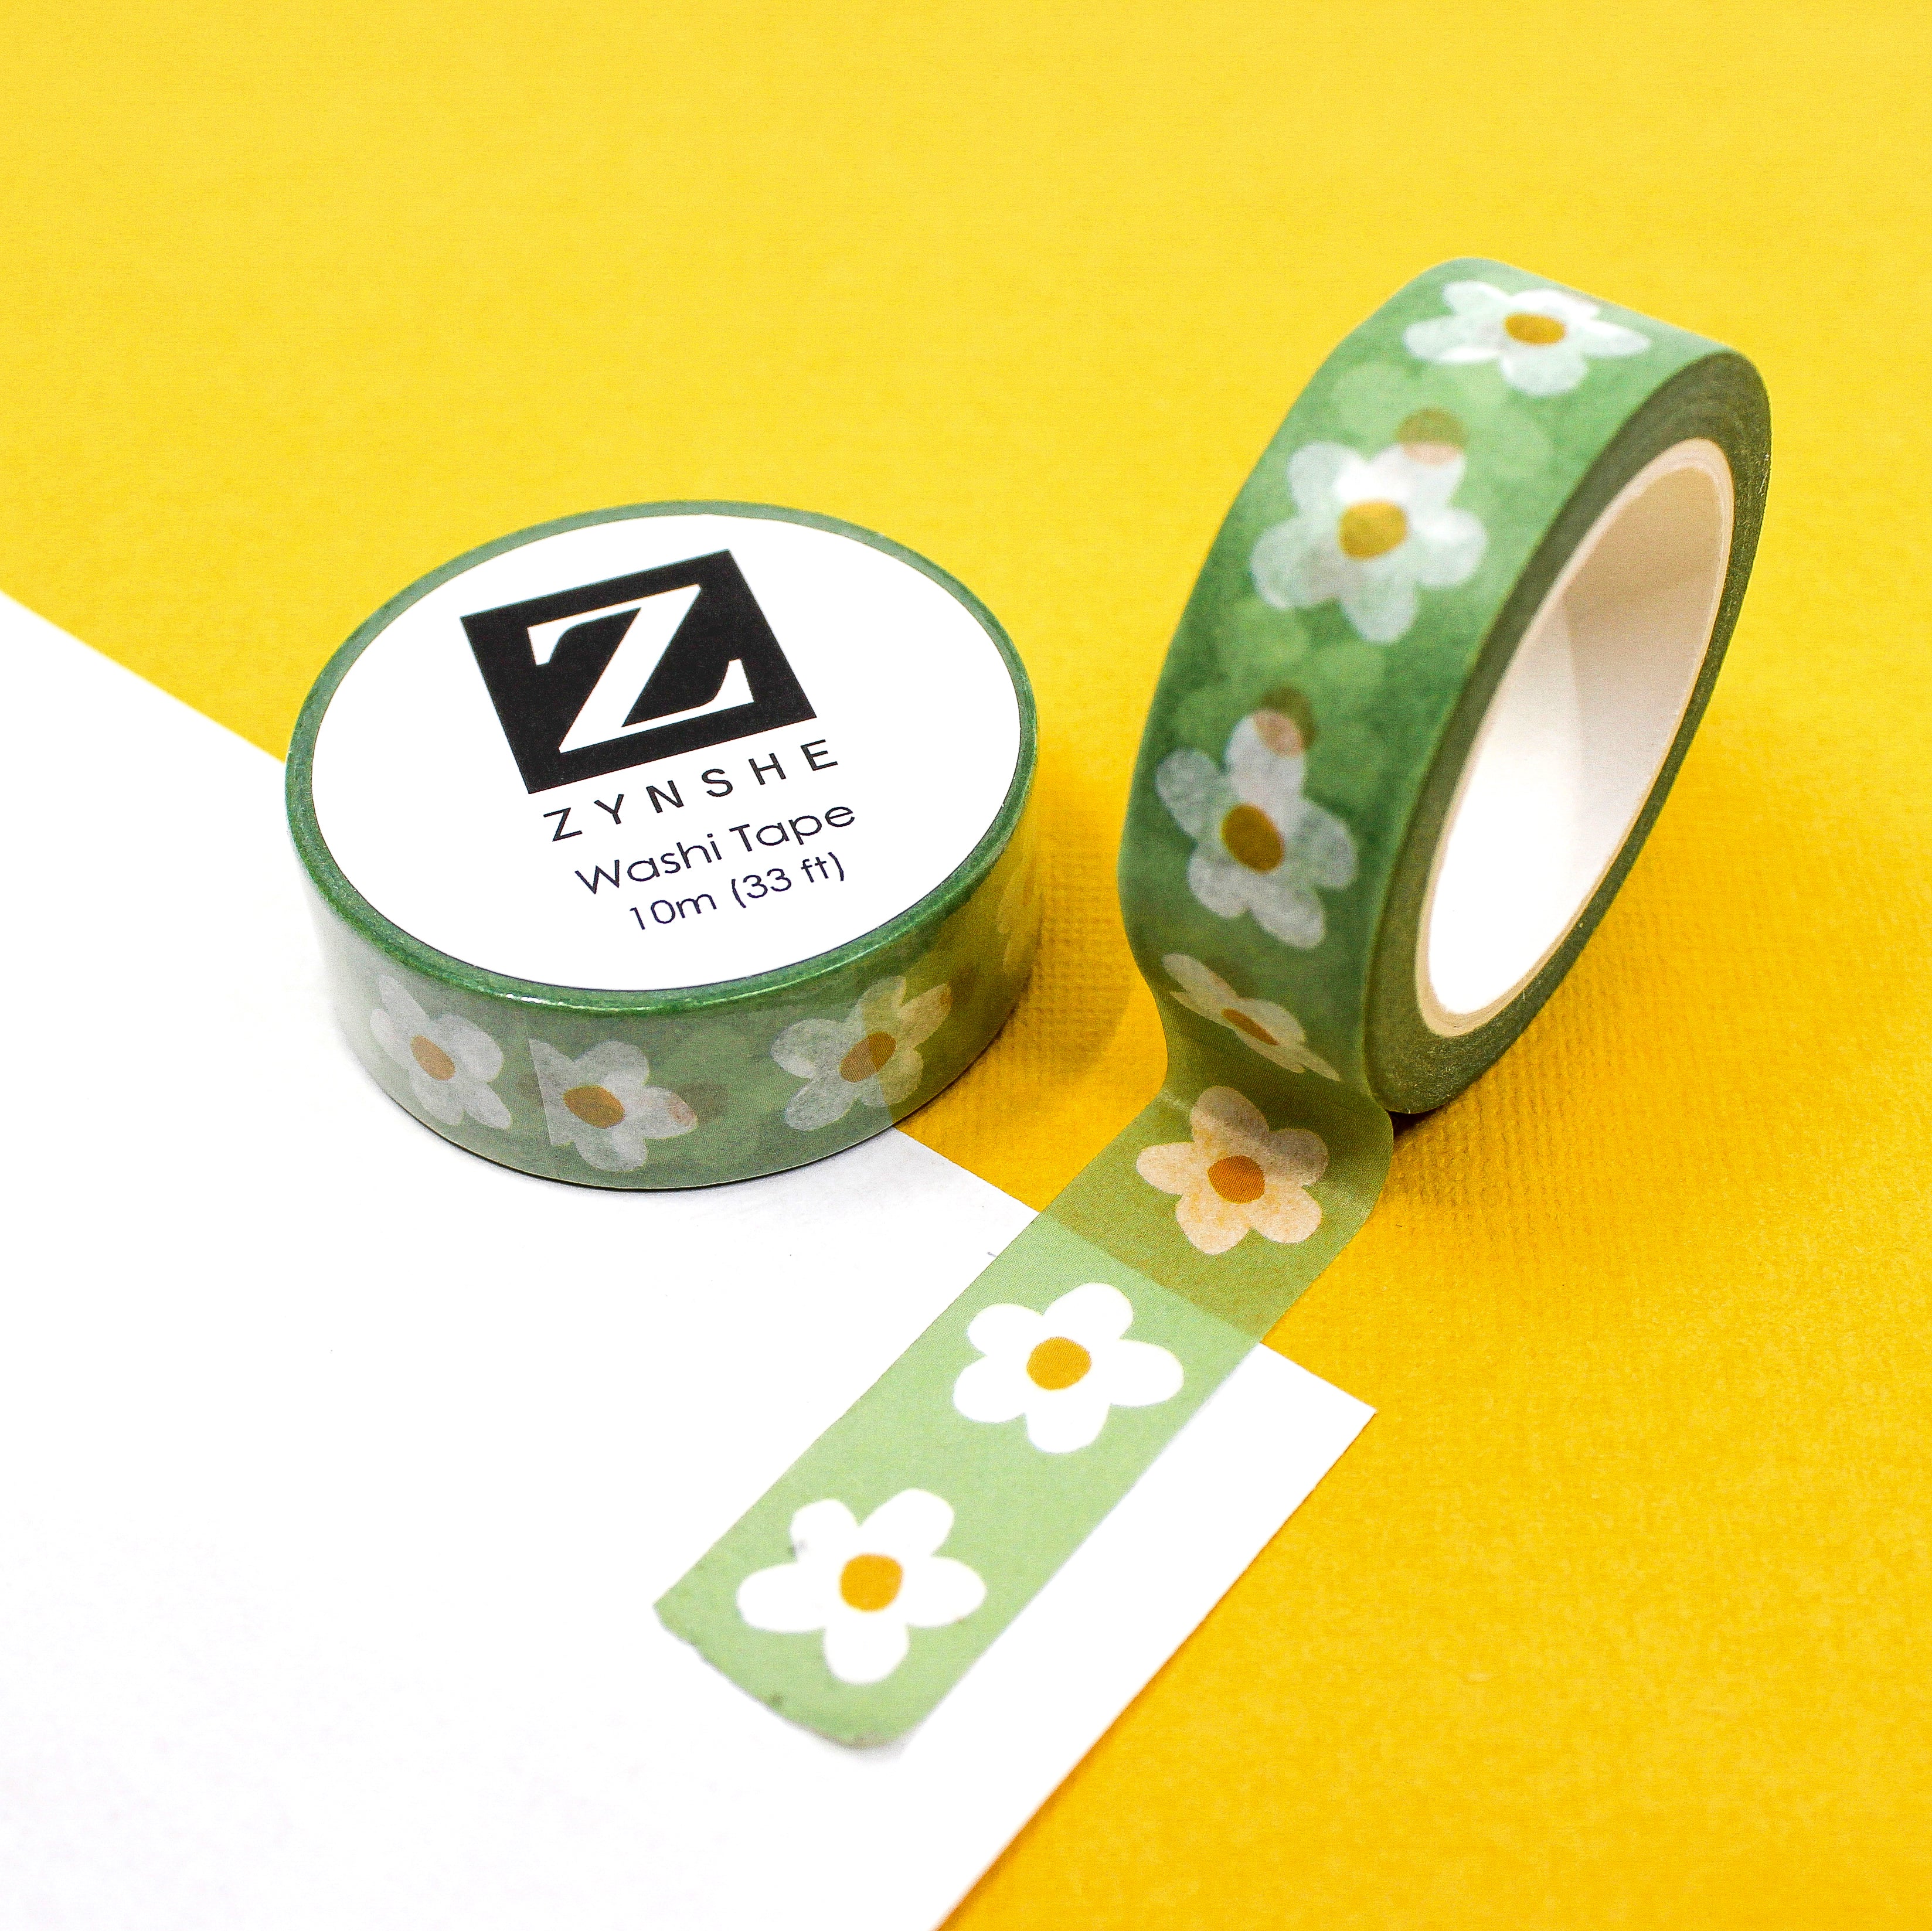 This is a green daisy flower view themed washi tape designed by Zynshe from BBB Supplies Craft Shop